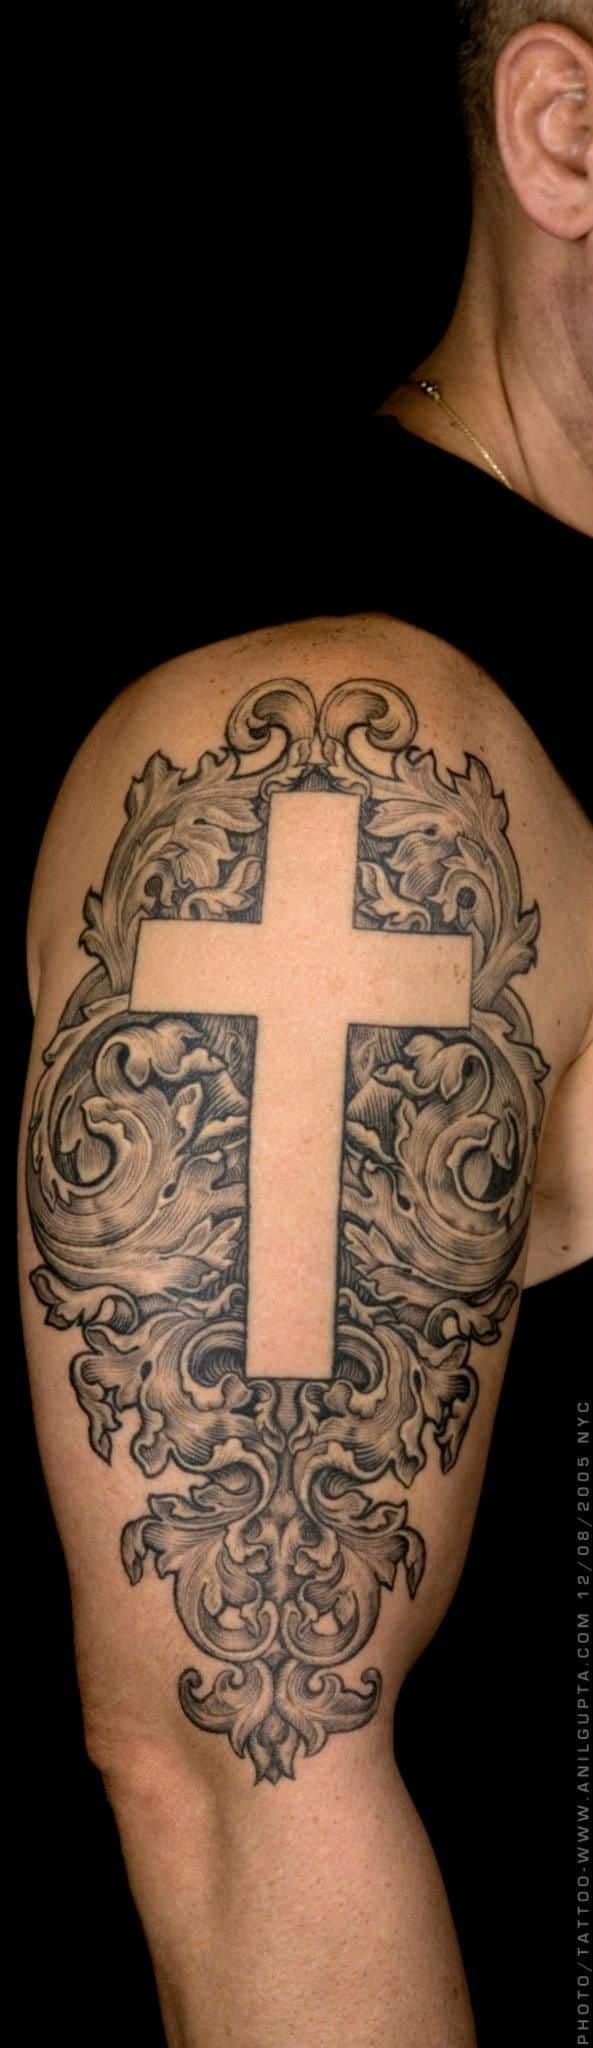 Cross Tattoos For Guys Tattoo Ideas And Designs For Men in measurements 593 X 2048